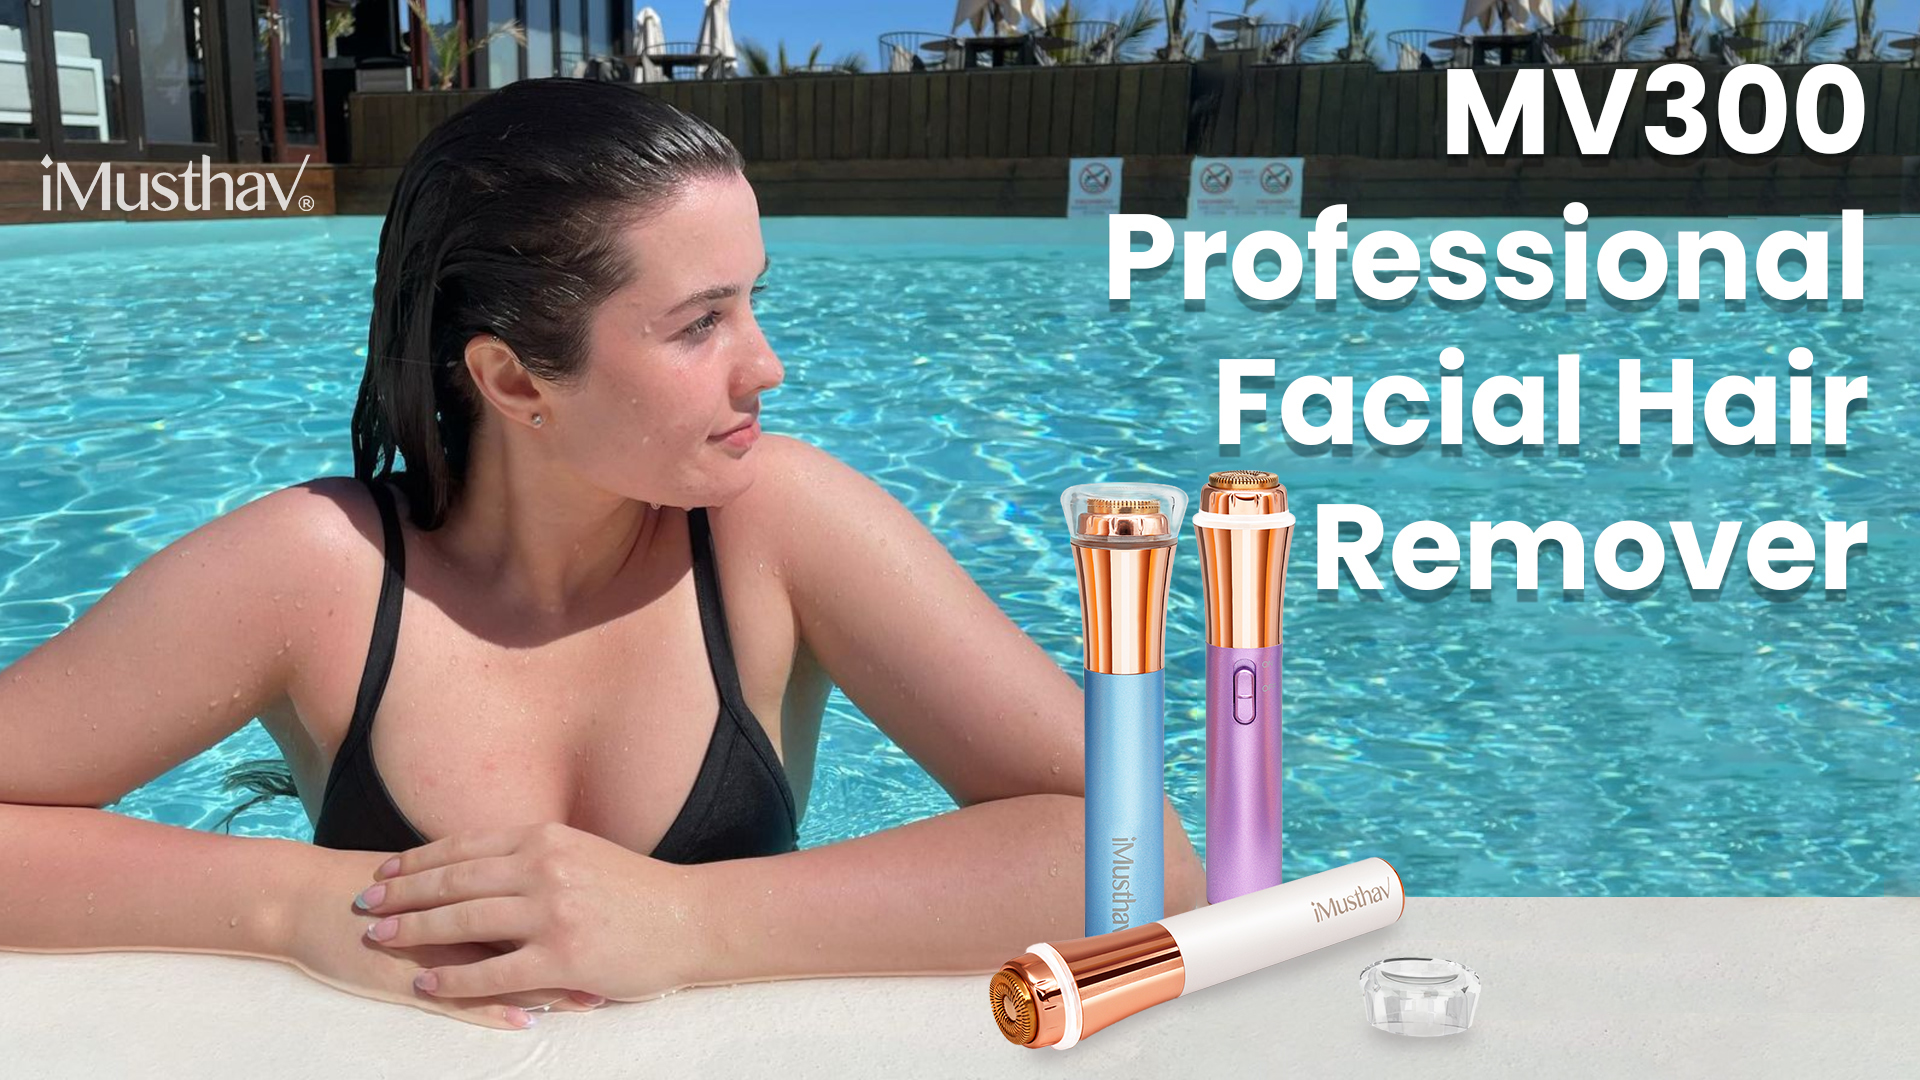 You are currently viewing iMusthav® Professional Facial Hair Remover MV300 | REVIEW & DEMO | Laura Dirtu | Italian with English Subtitle